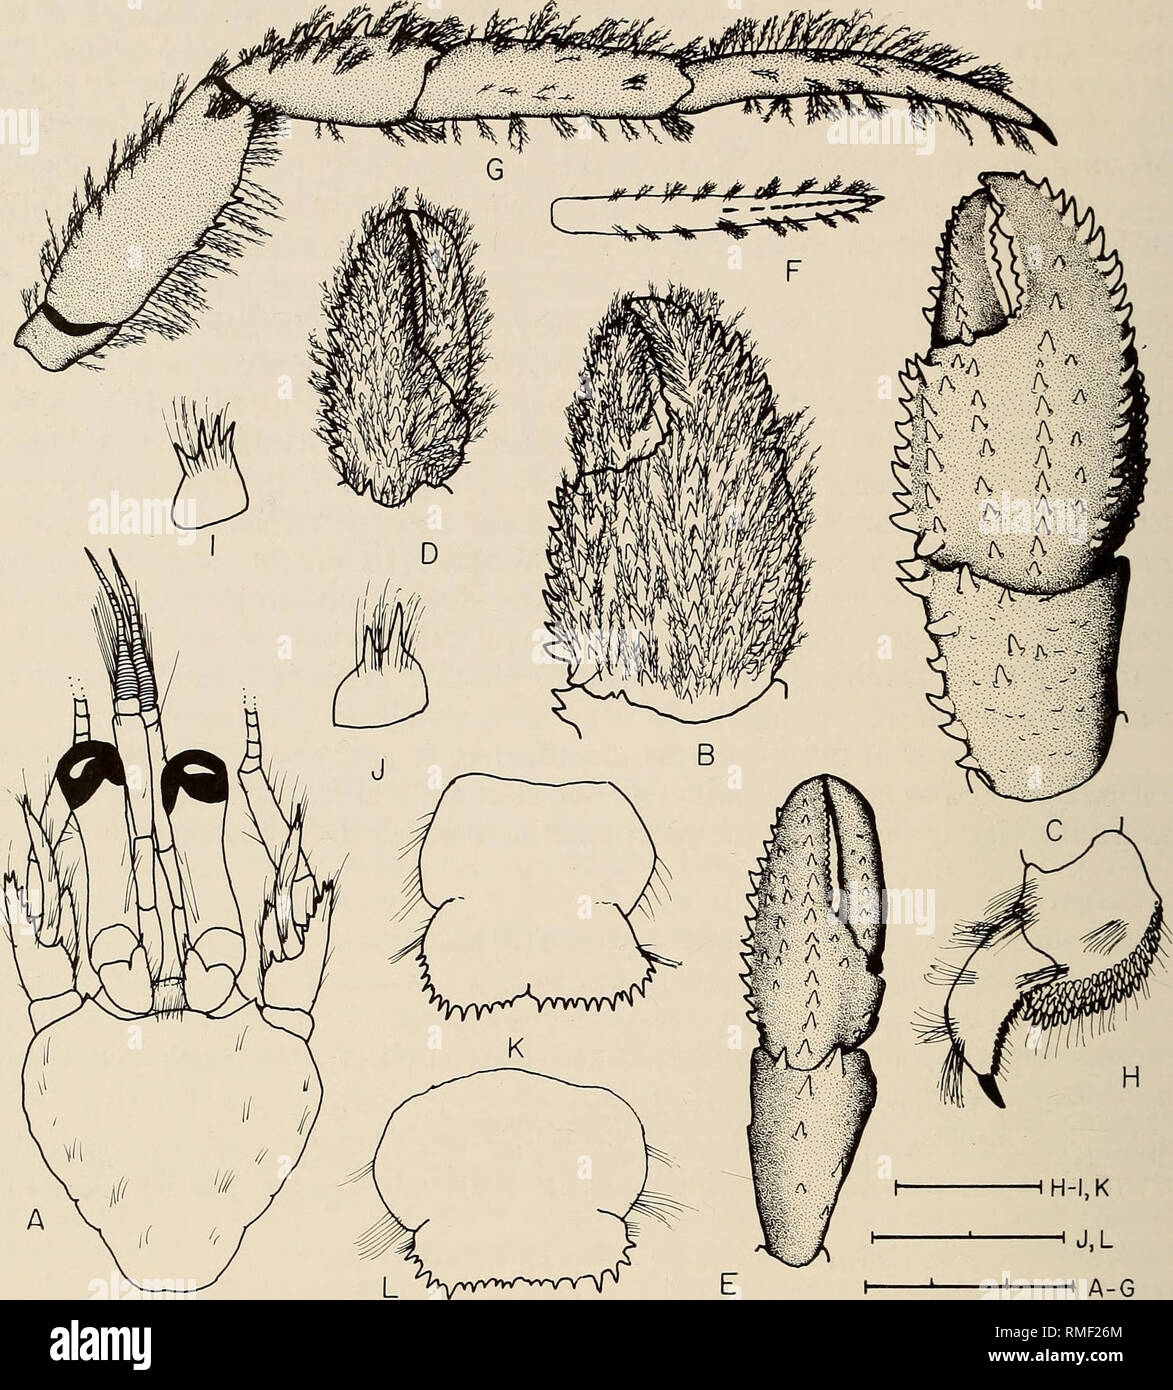 . Annals of the South African Museum = Annale van die Suid-Afrikaanse Museum. Natural history. 310 ANNALS OF THE SOUTH AFRICAN MUSEUM. Fig. 2. A-J. Pagurus cuanensis Bell, 1845, ovigerous 9 (4.4 mm) from Meiring Naude Stn XX113 (NHM 1997.724-725. K. Female (8.0 mm) from False Bay (SAM-A1538). L. Male (6.8 mm) from Cape St Blaize (SAM-A1539). A. Shield and cephalic appendages. B. Chela of right cheliped. C. Chela and carpus of right cheliped with setae omitted. D. Chela of left cheliped. E. Chela and carpus of left cheliped with setae omitted. F. Right second pereopod (lateral view). G. Dactyl  Stock Photo